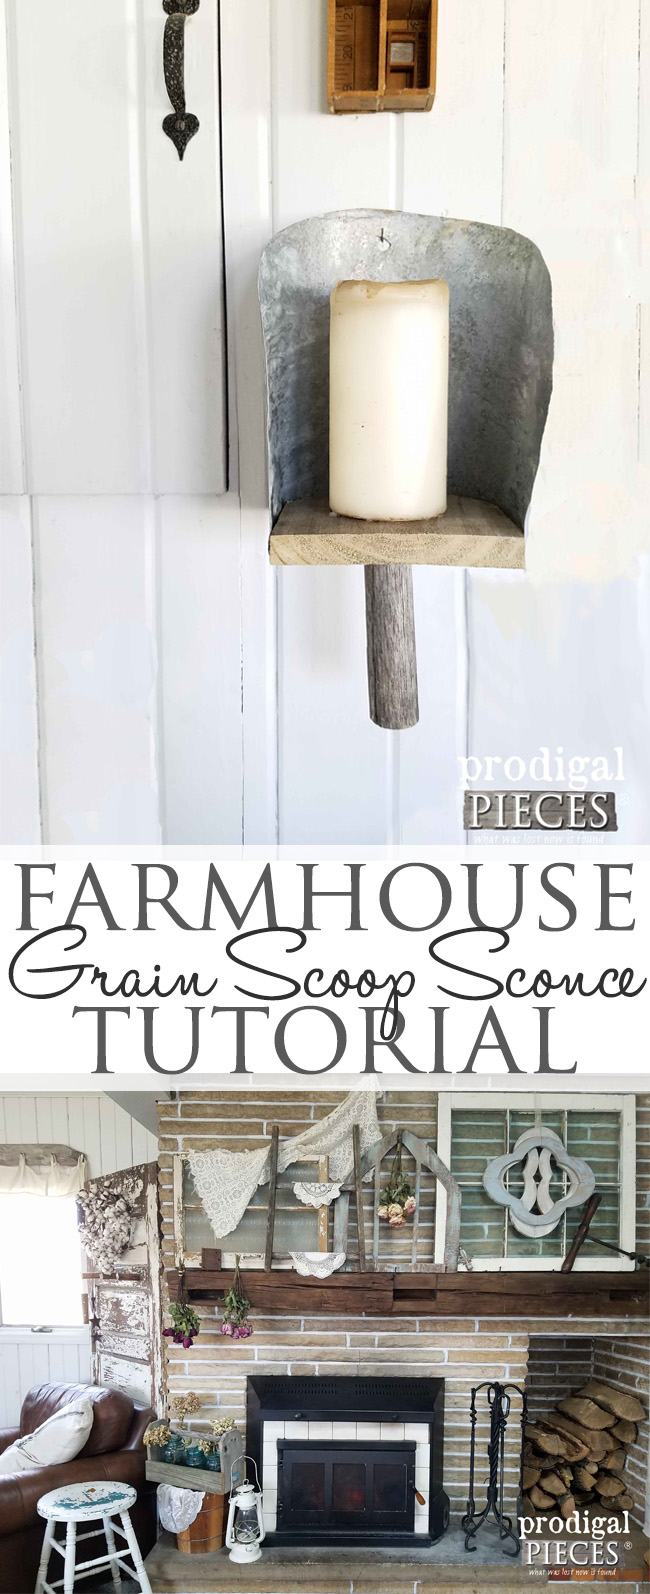 DIY Farmhouse Grain Scoop Sconce with Step-by-Step Tutorial by Prodigal Pieces | prodigalpieces.com